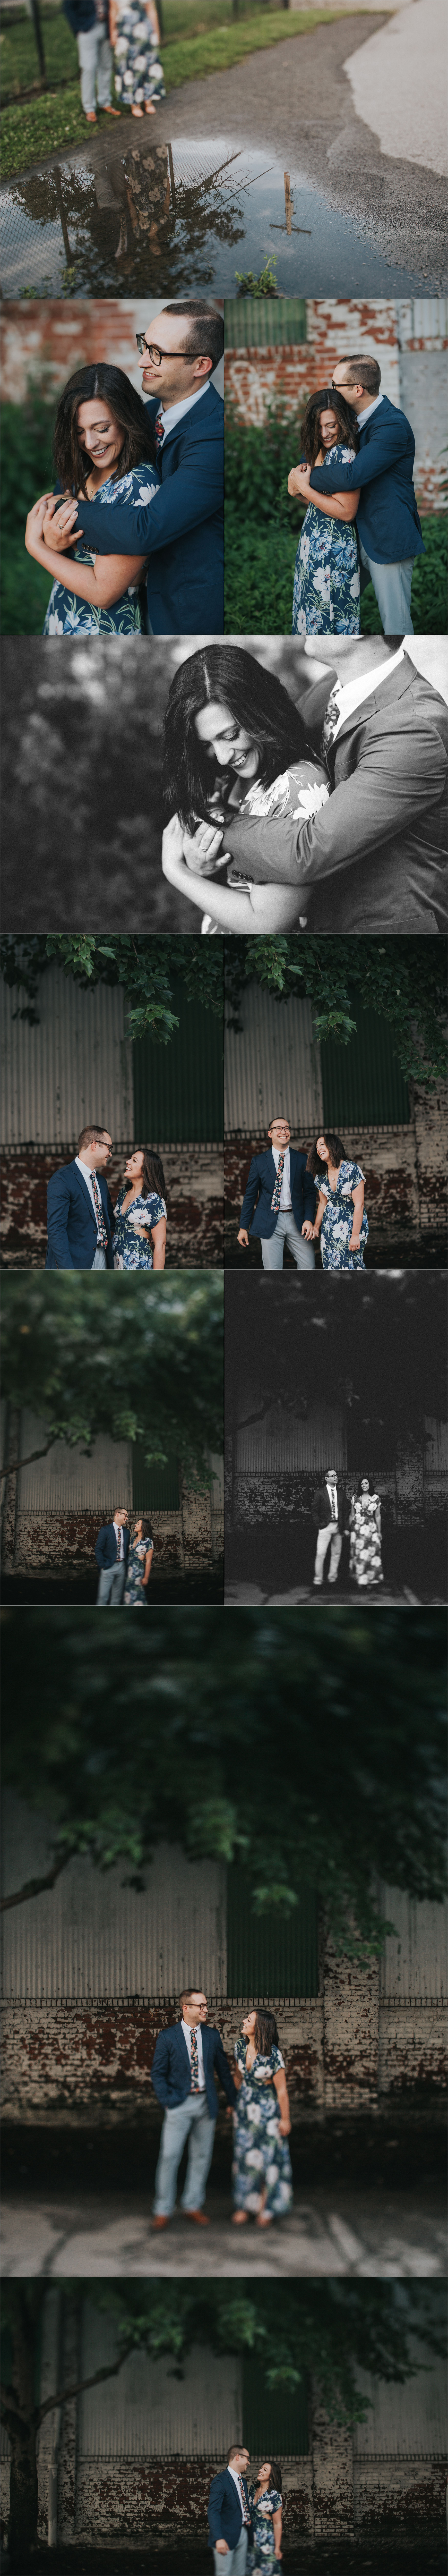 03-summer-engagement-session-lawrenceville-pittsburgh-pa.jpg